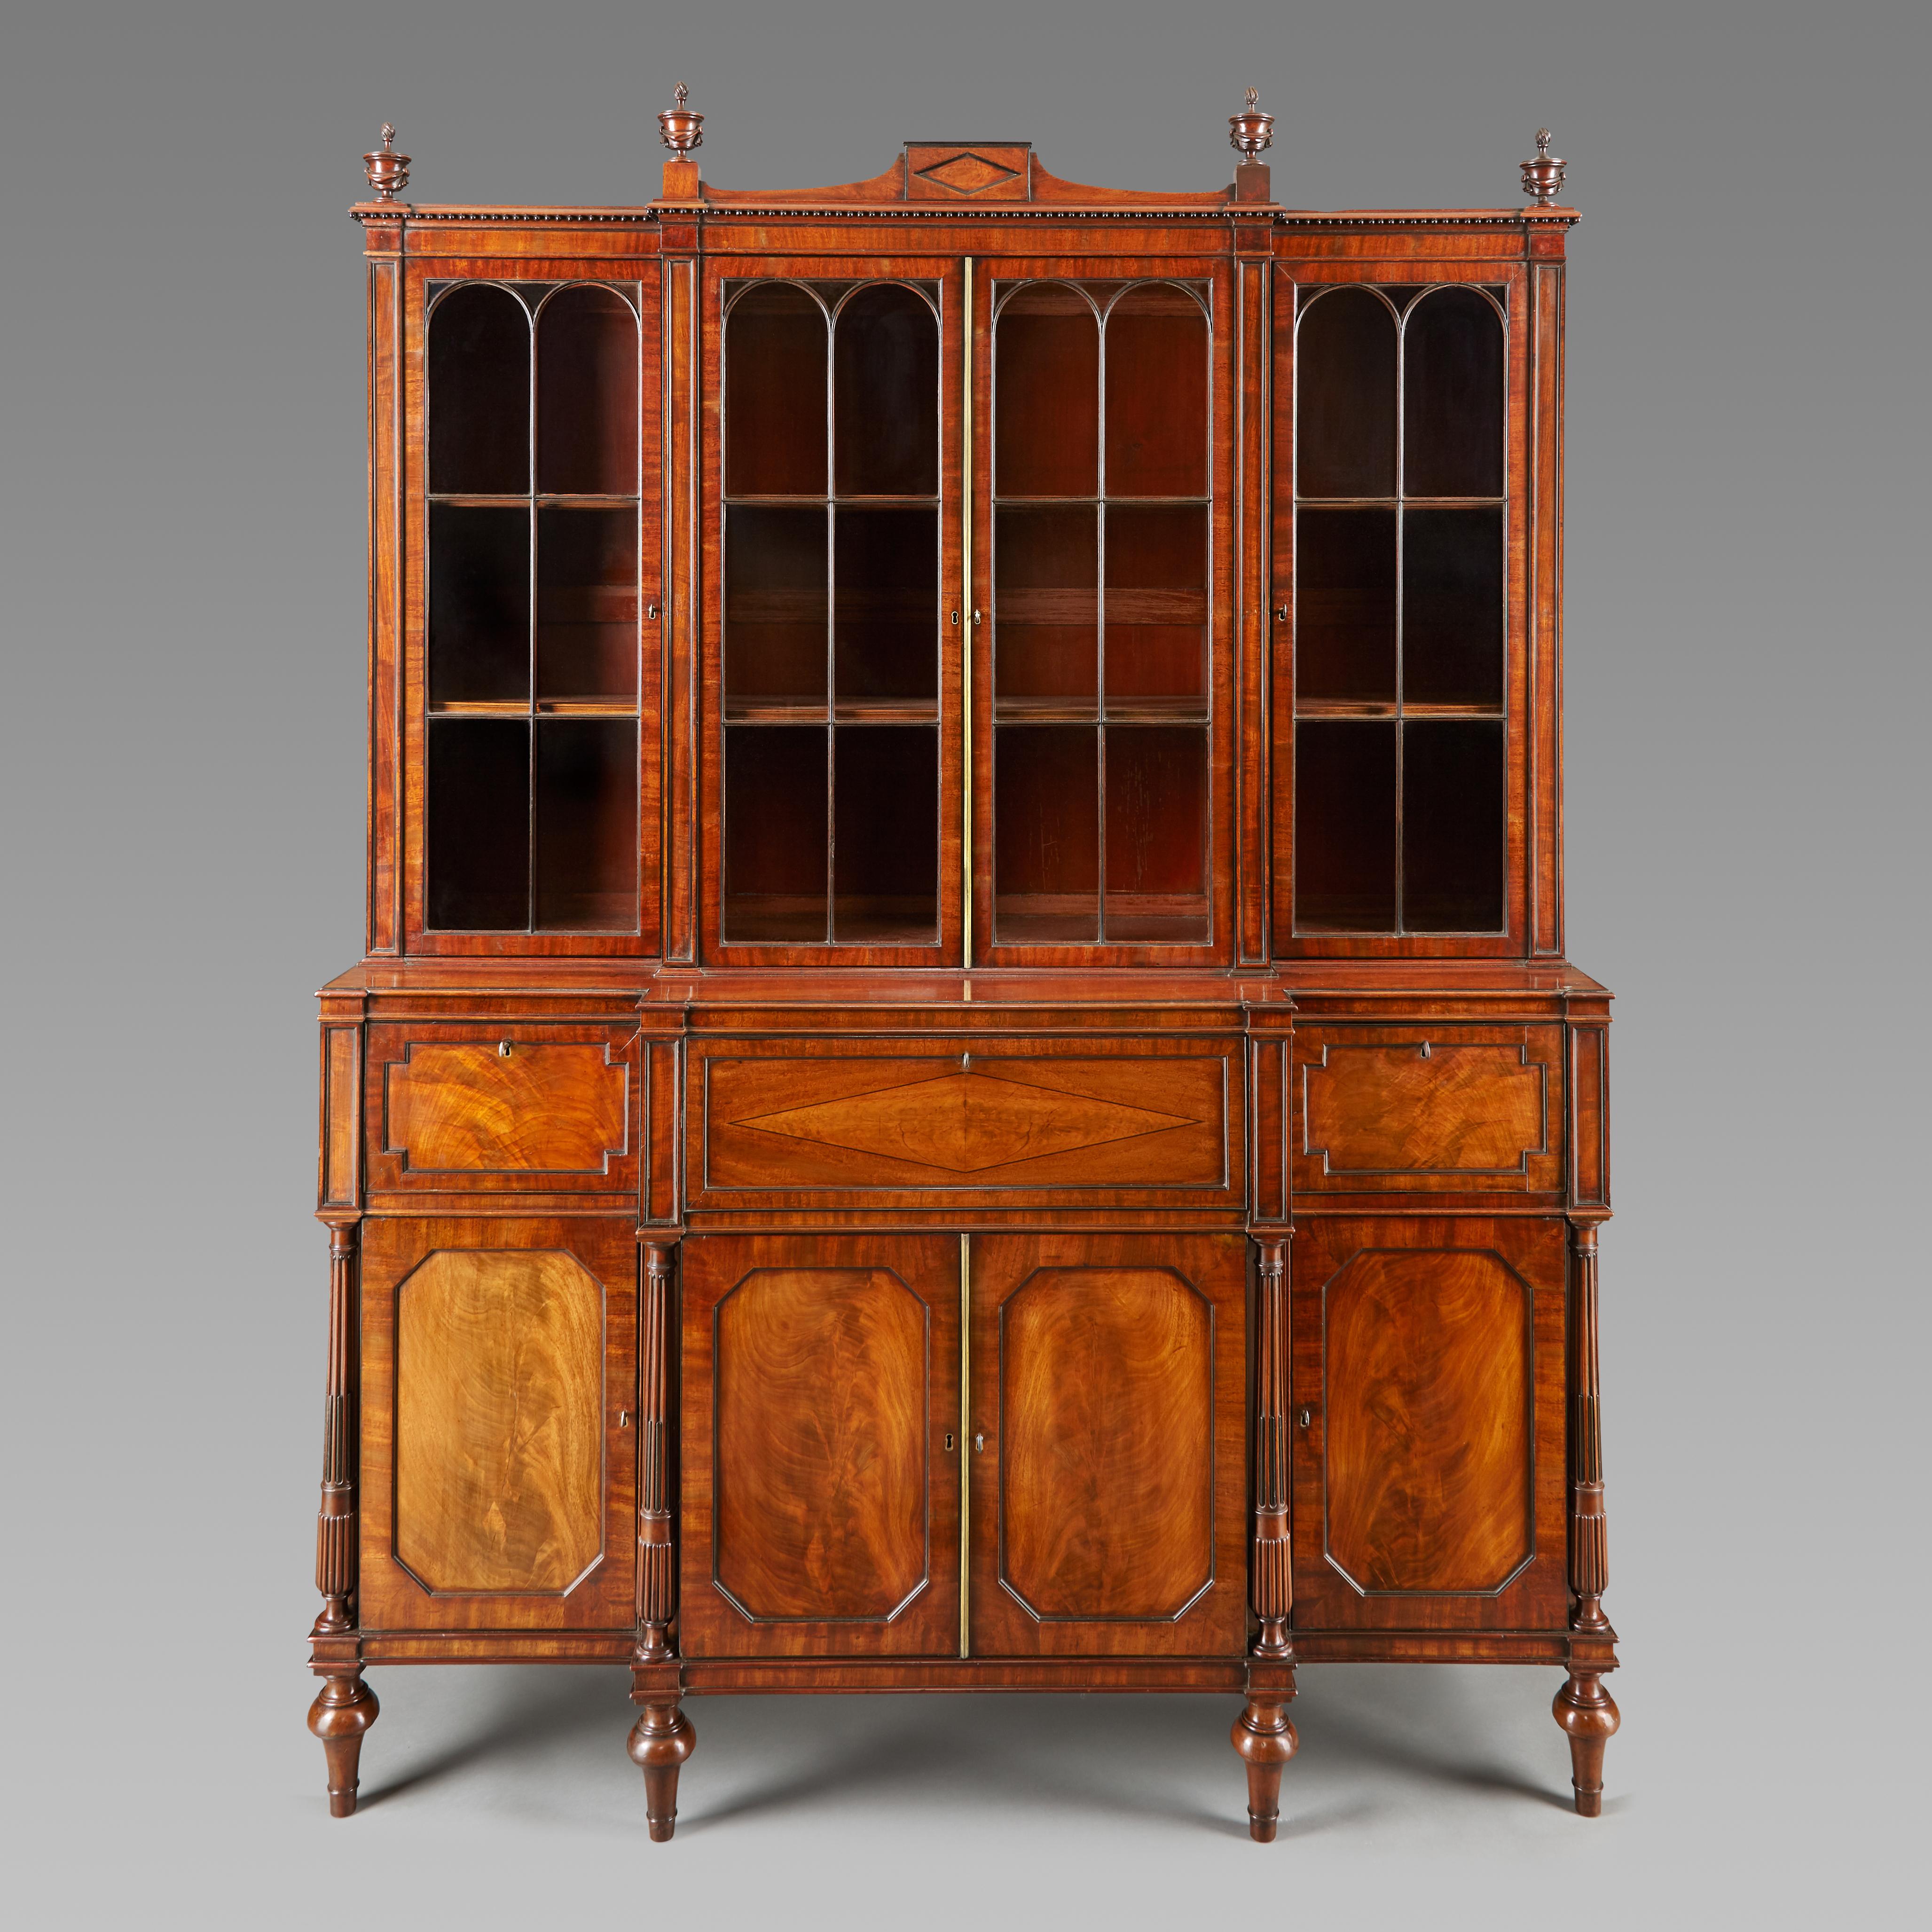 An Exceptional George III Period mahogany bookcase of small proportions attributed to Gillows. Raised on turned feet above which are stop fluted and reeded columns. The panel doors conceal shelved interiors and the centre drawer is fitted with a